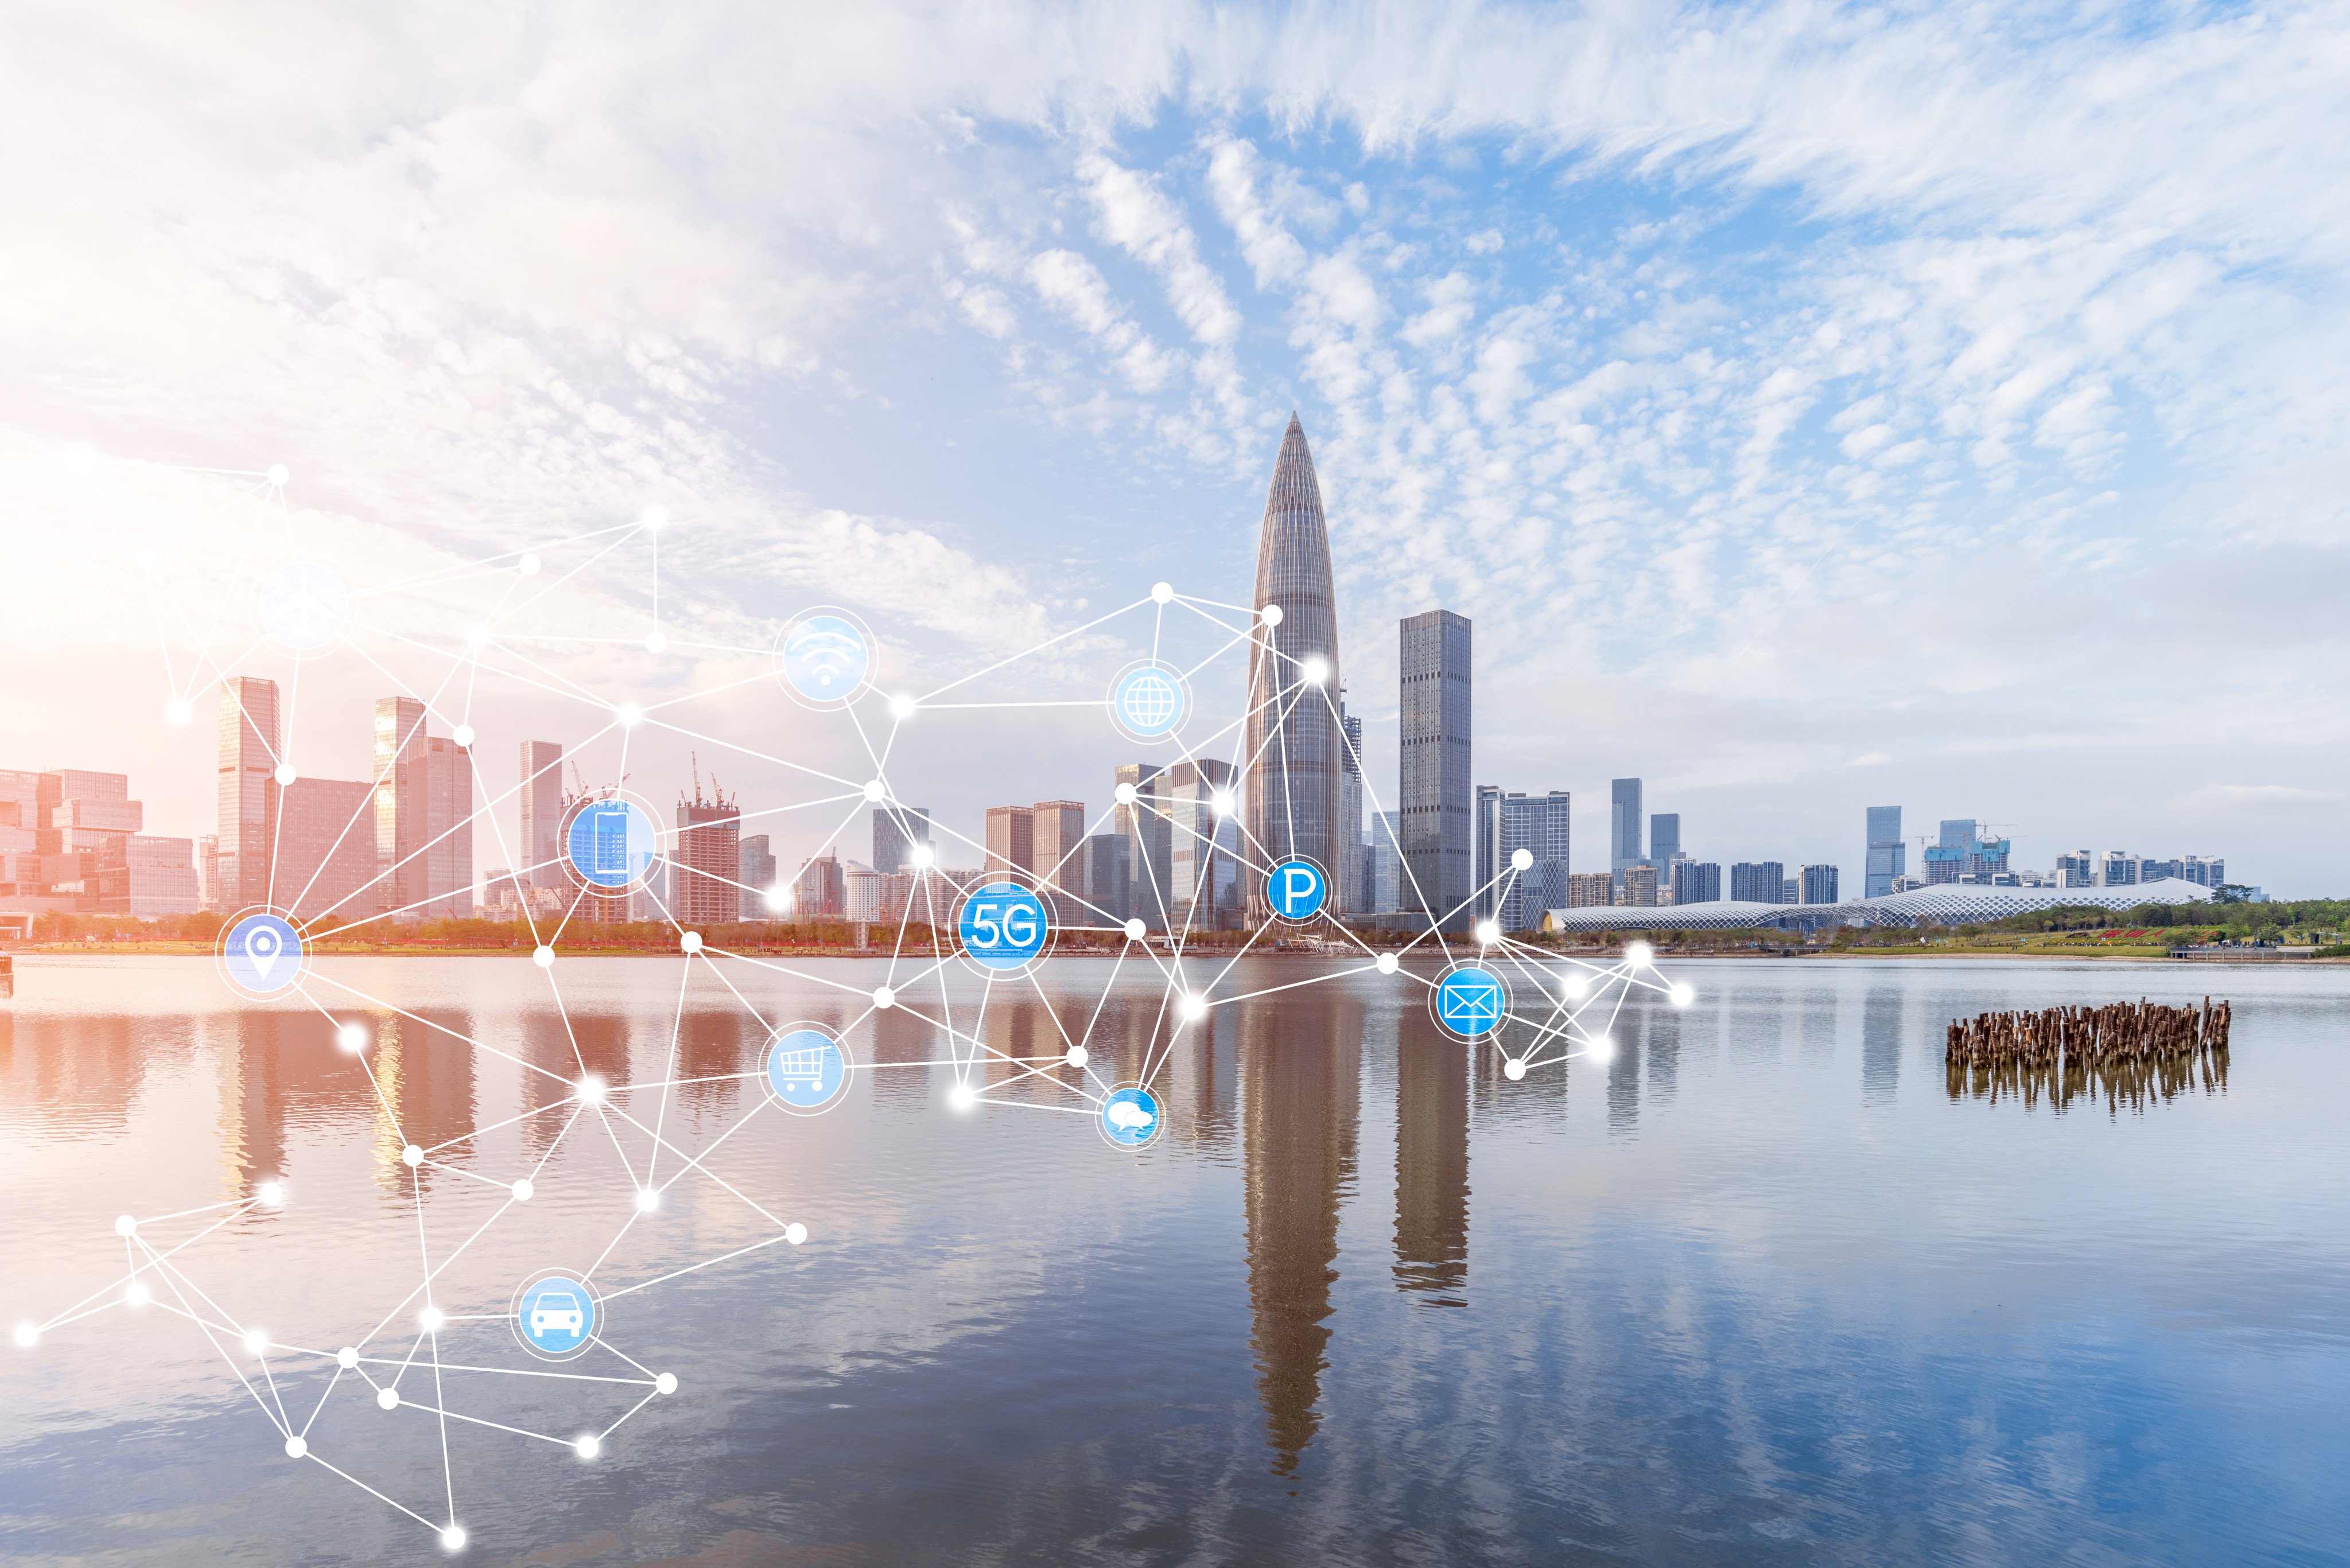 With 10,000 more 5G base stations, Shenzhen expects its average internet download speeds to reach 500 megabits per second by the end of this year. Photo: Shutterstock